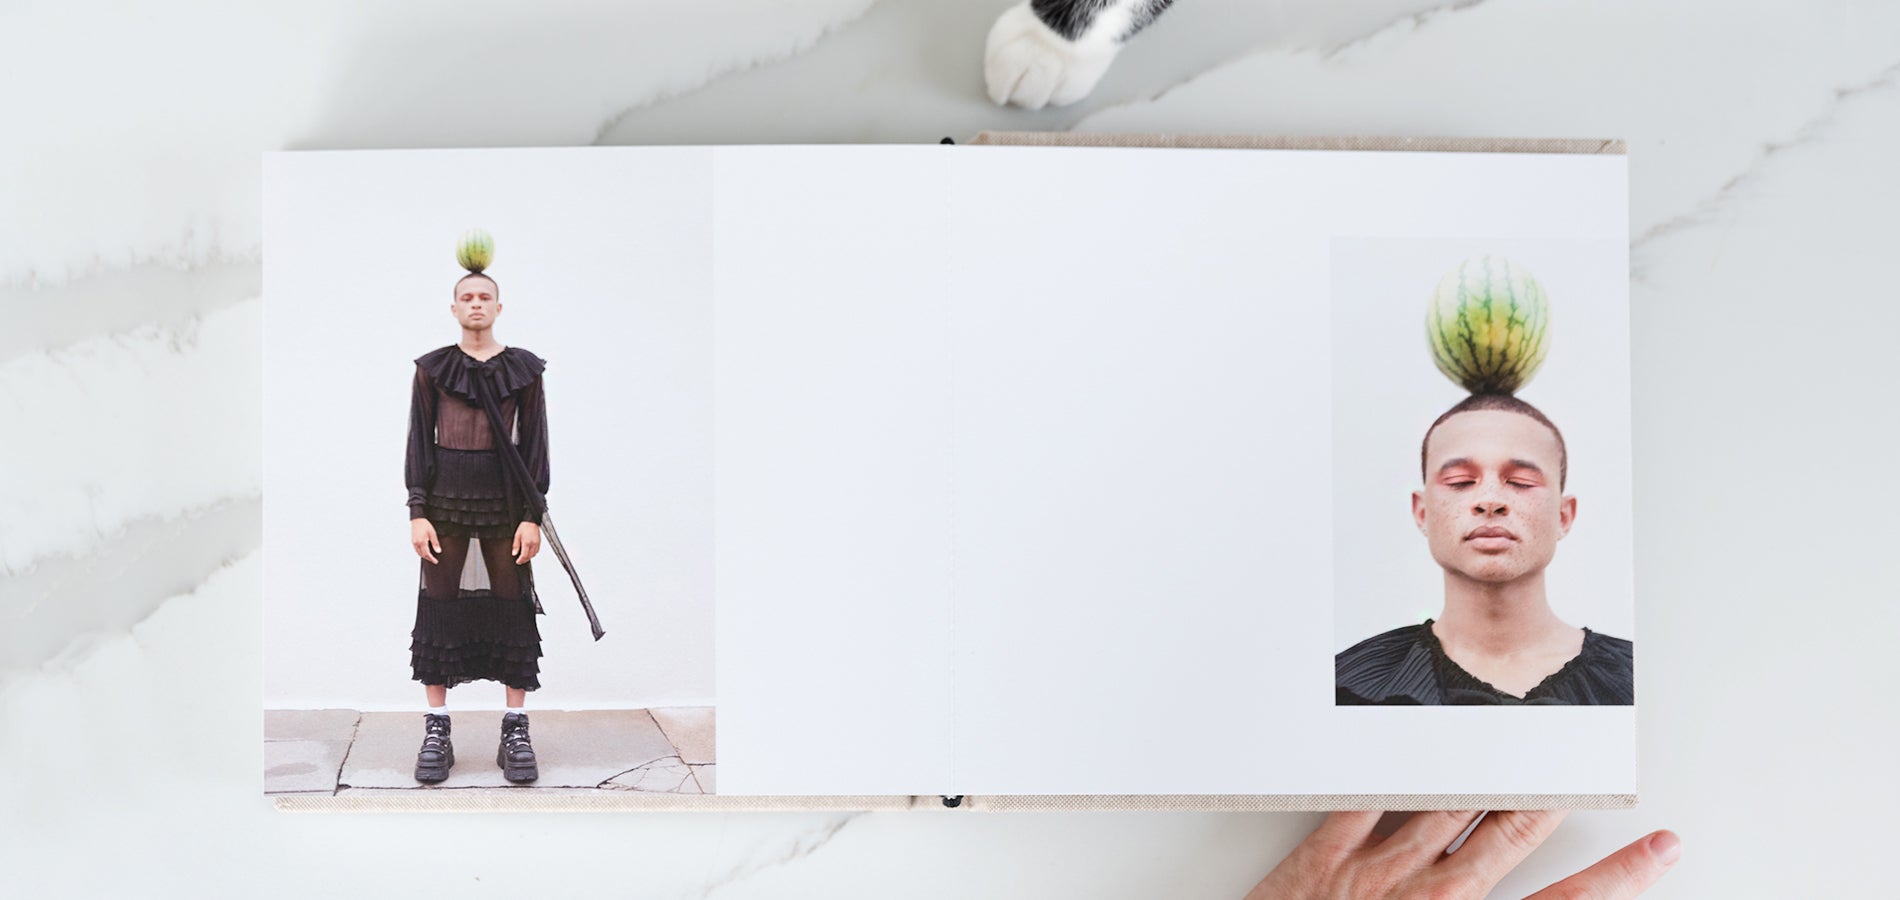 Artifact Uprising Layflat Photo Album opened to two page spread with high-fashion portrait of man balancing watermelon on his head on either page